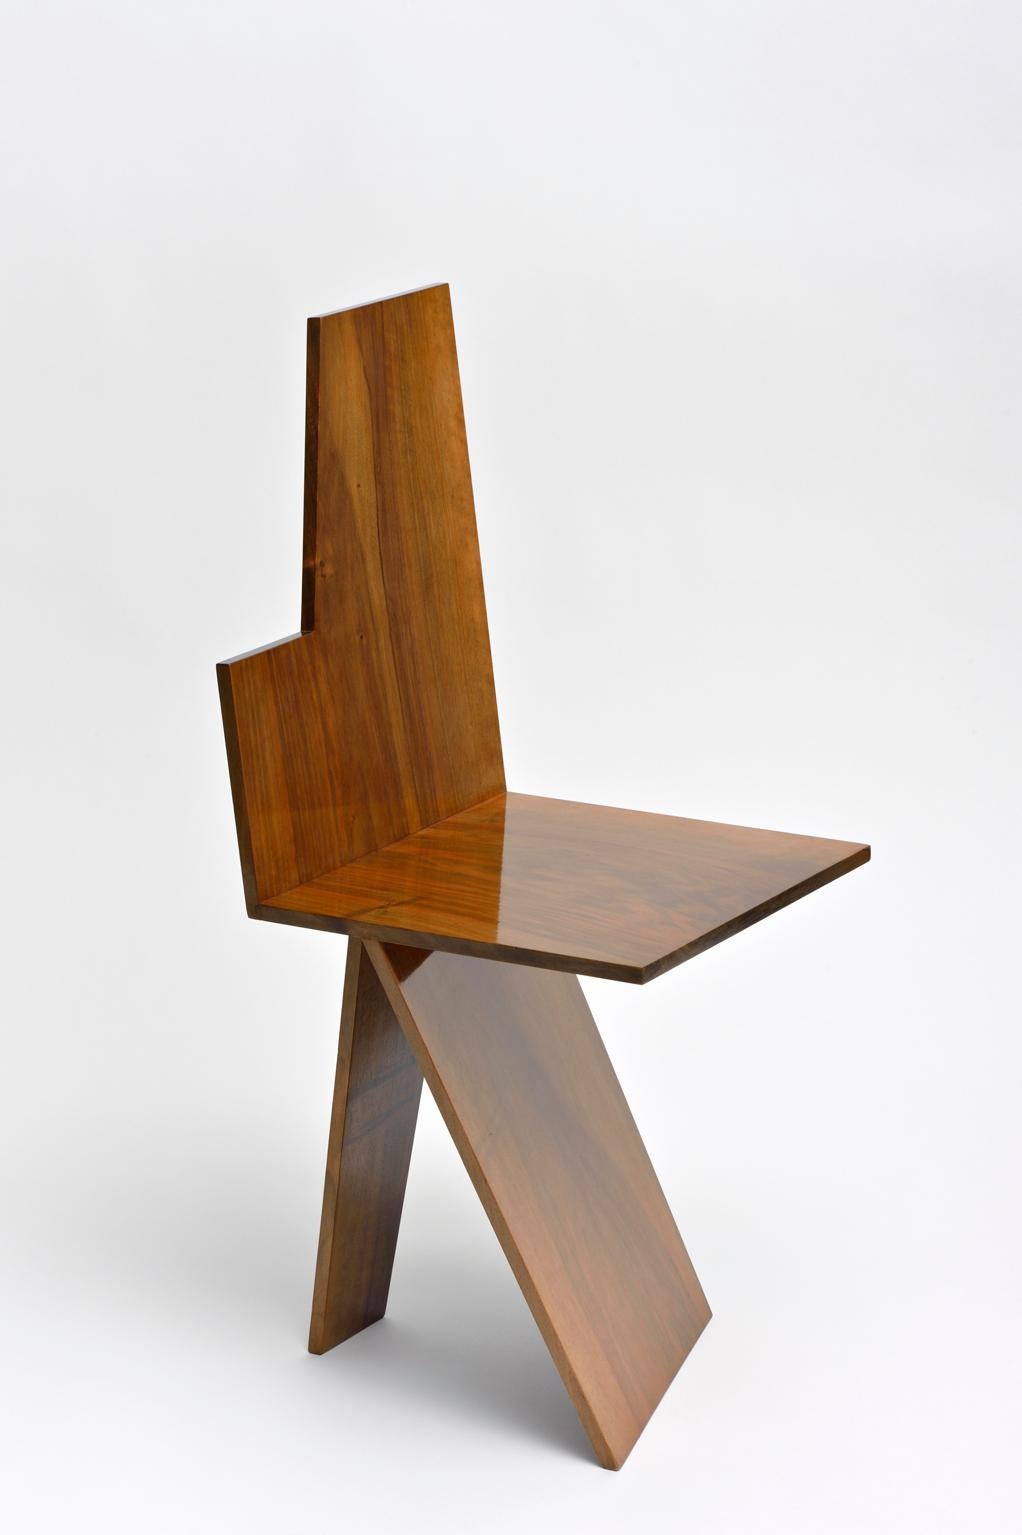 Sculpted chair Mosoo - signed by Kaaron
Signed and numbered
Edition of 8 + 4 AP
Walnut
Dimensions: (H) 44cm x (pl) 37.5cm x 35cm

Kaaron
Important emerging French artists.
